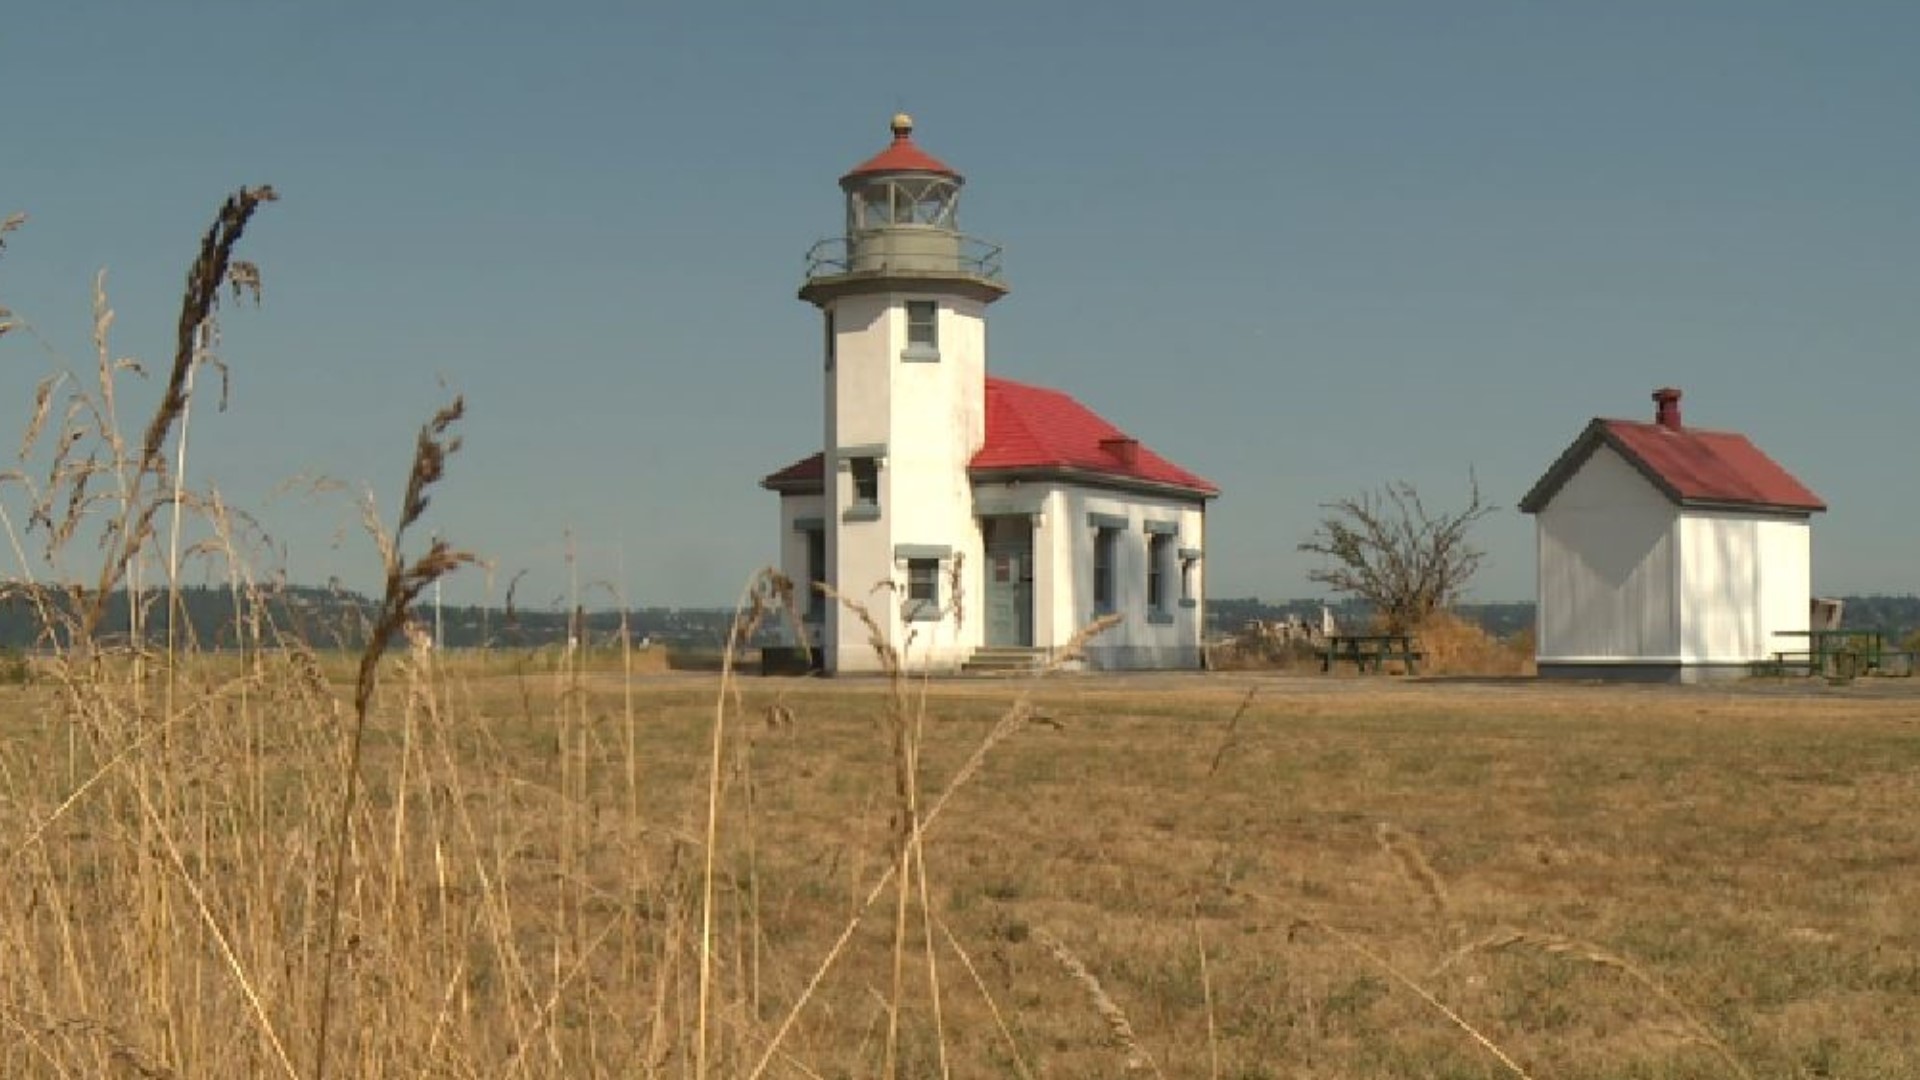 Local Tara Morgan gives Evening a tour of her favorite places to visit on the island she calls home. #k5evening